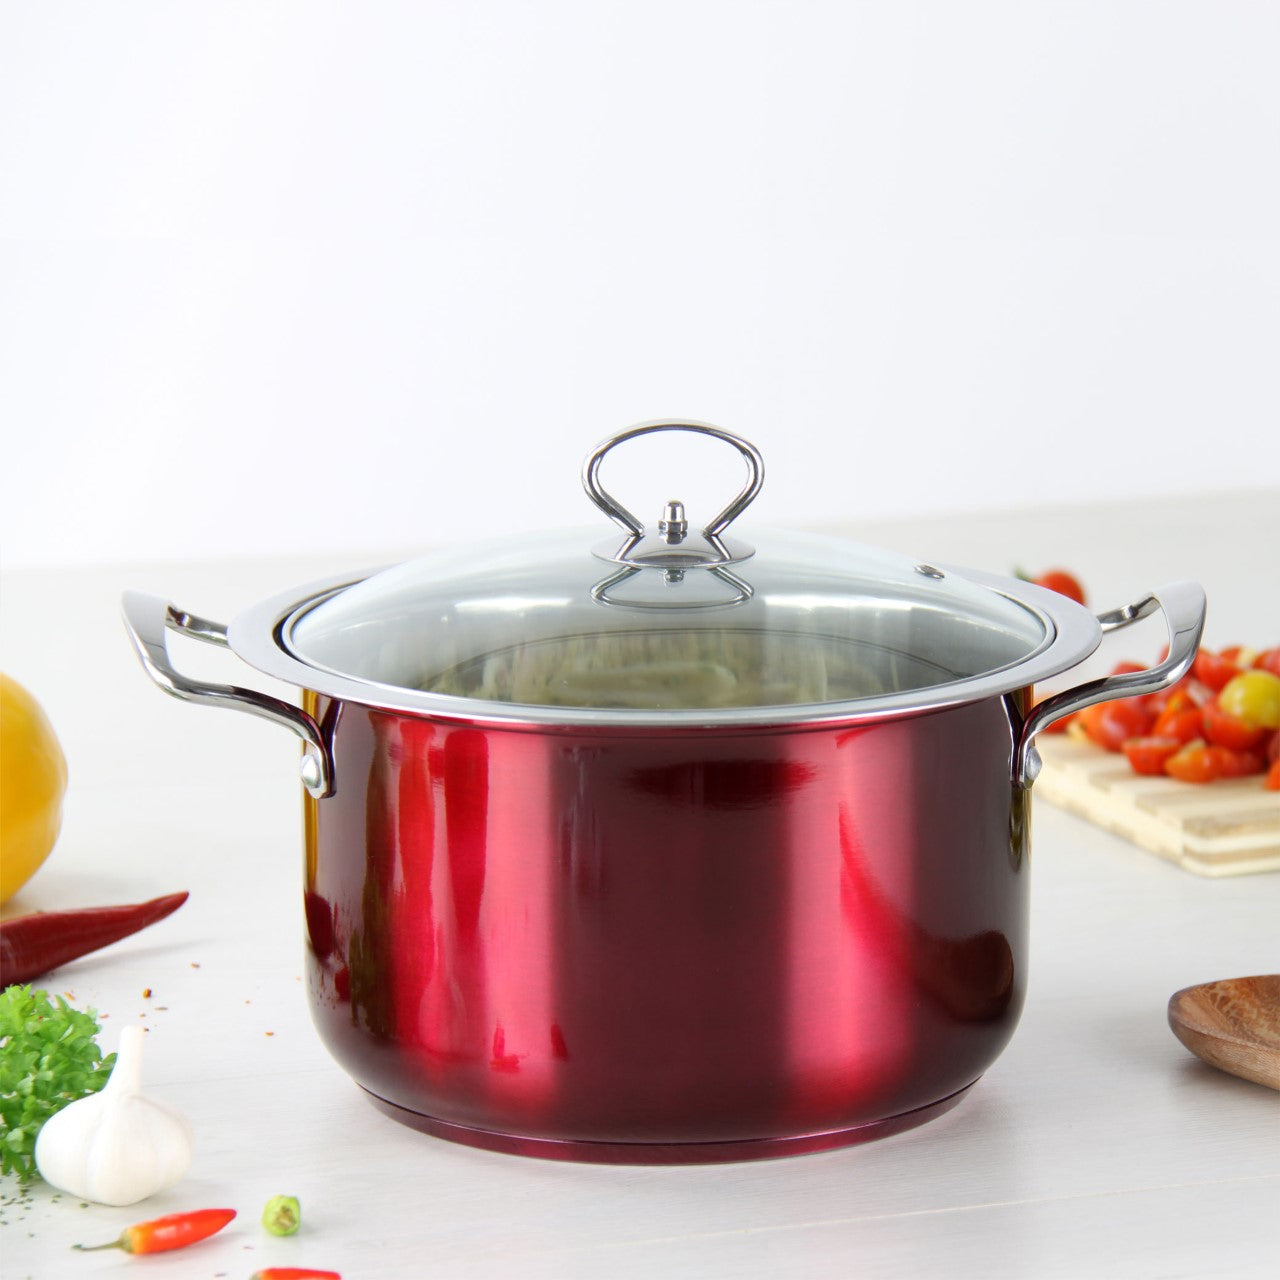 SQ Pro Stainless Steel Stockpot Set of 3 Gems Ruby 10 / 12.30 / 14.60 Litre 9576 / 2625 (Big Parcel Rate)